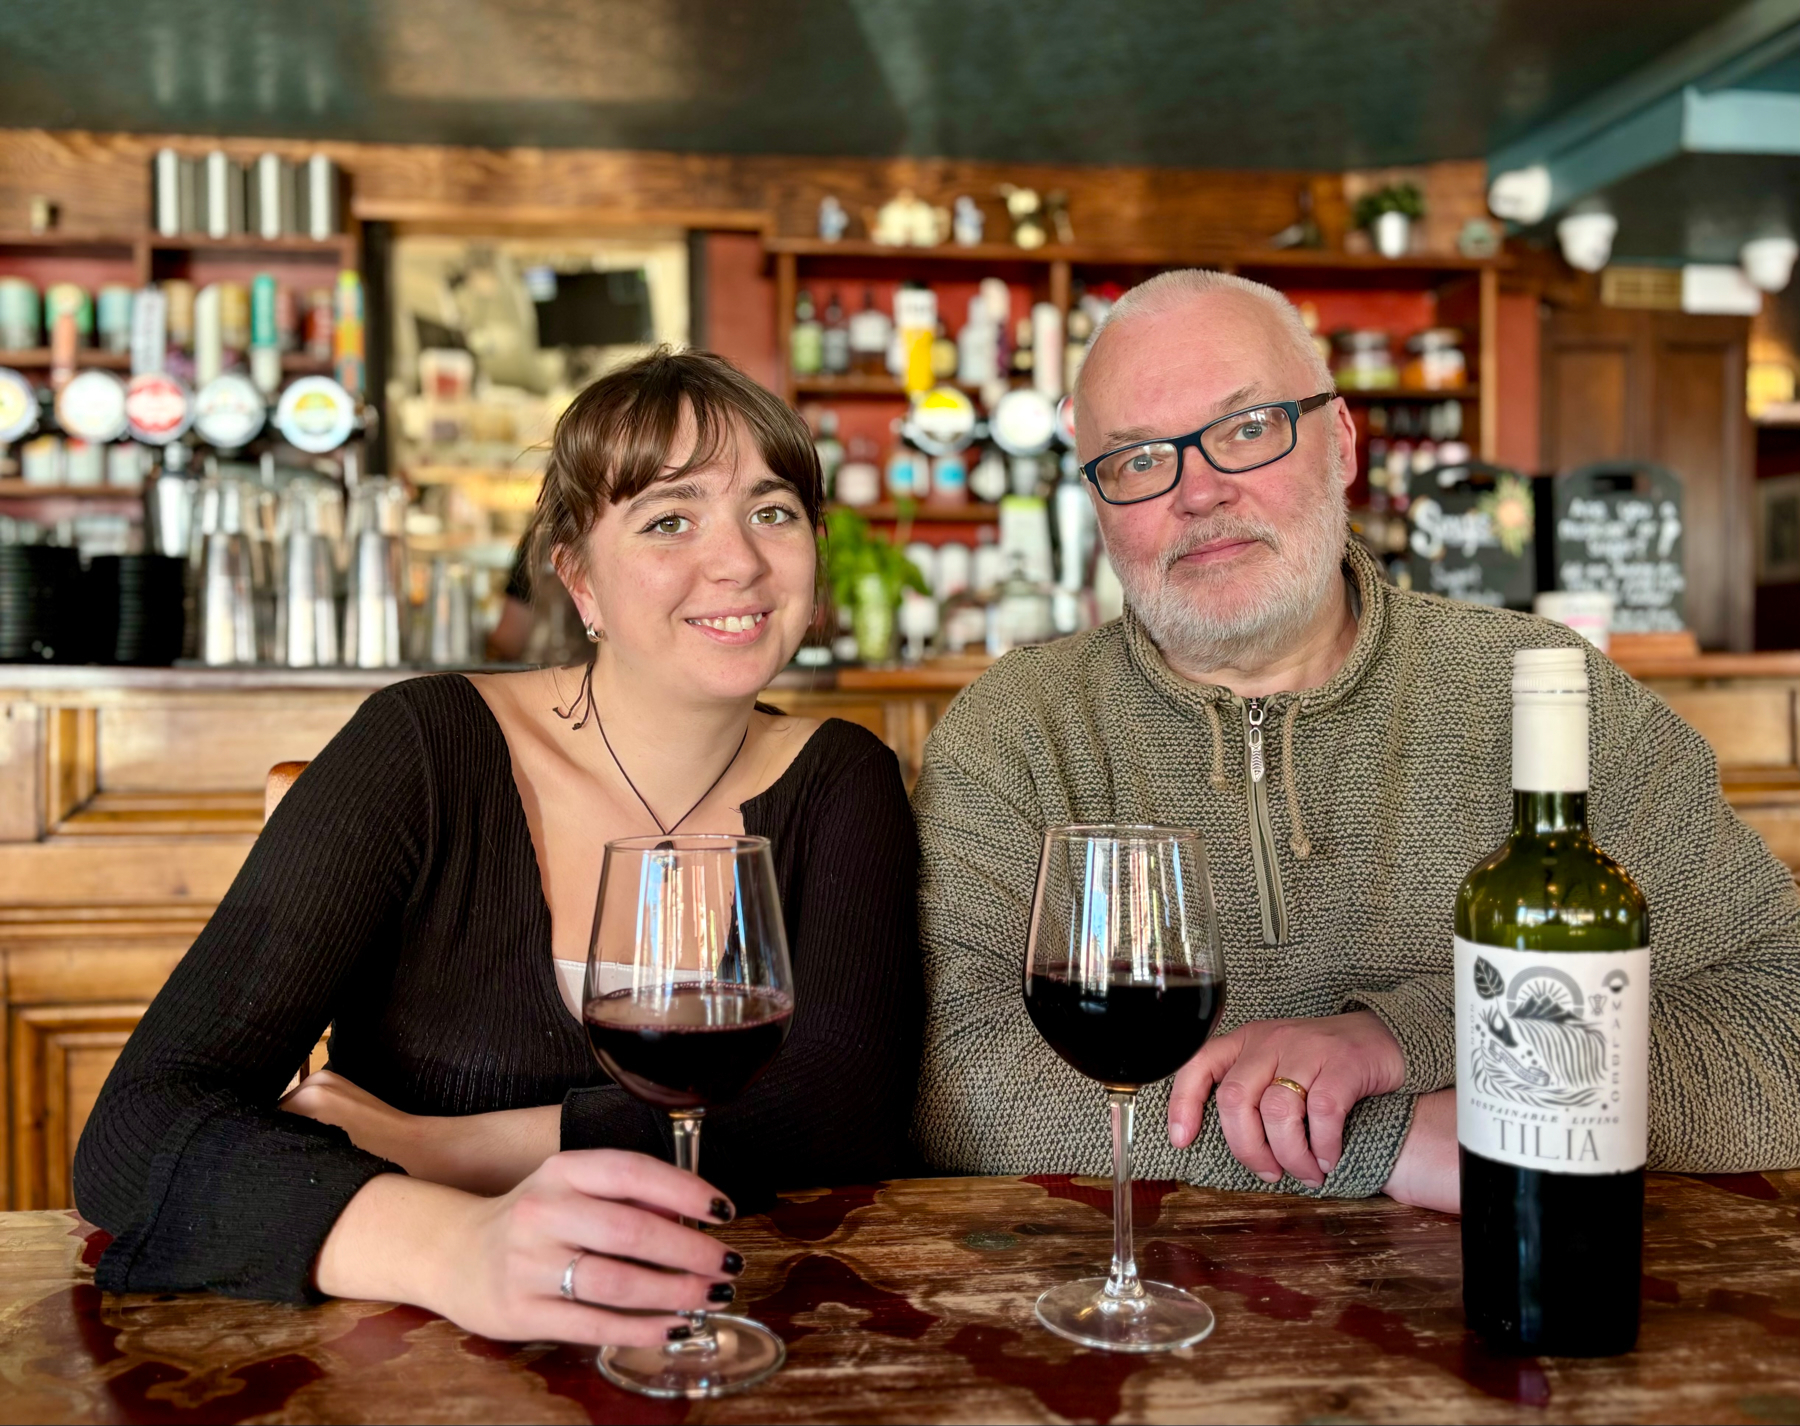 Two people sitting at a bar with glasses of red wine and a bottle of Tilia wine on the table.